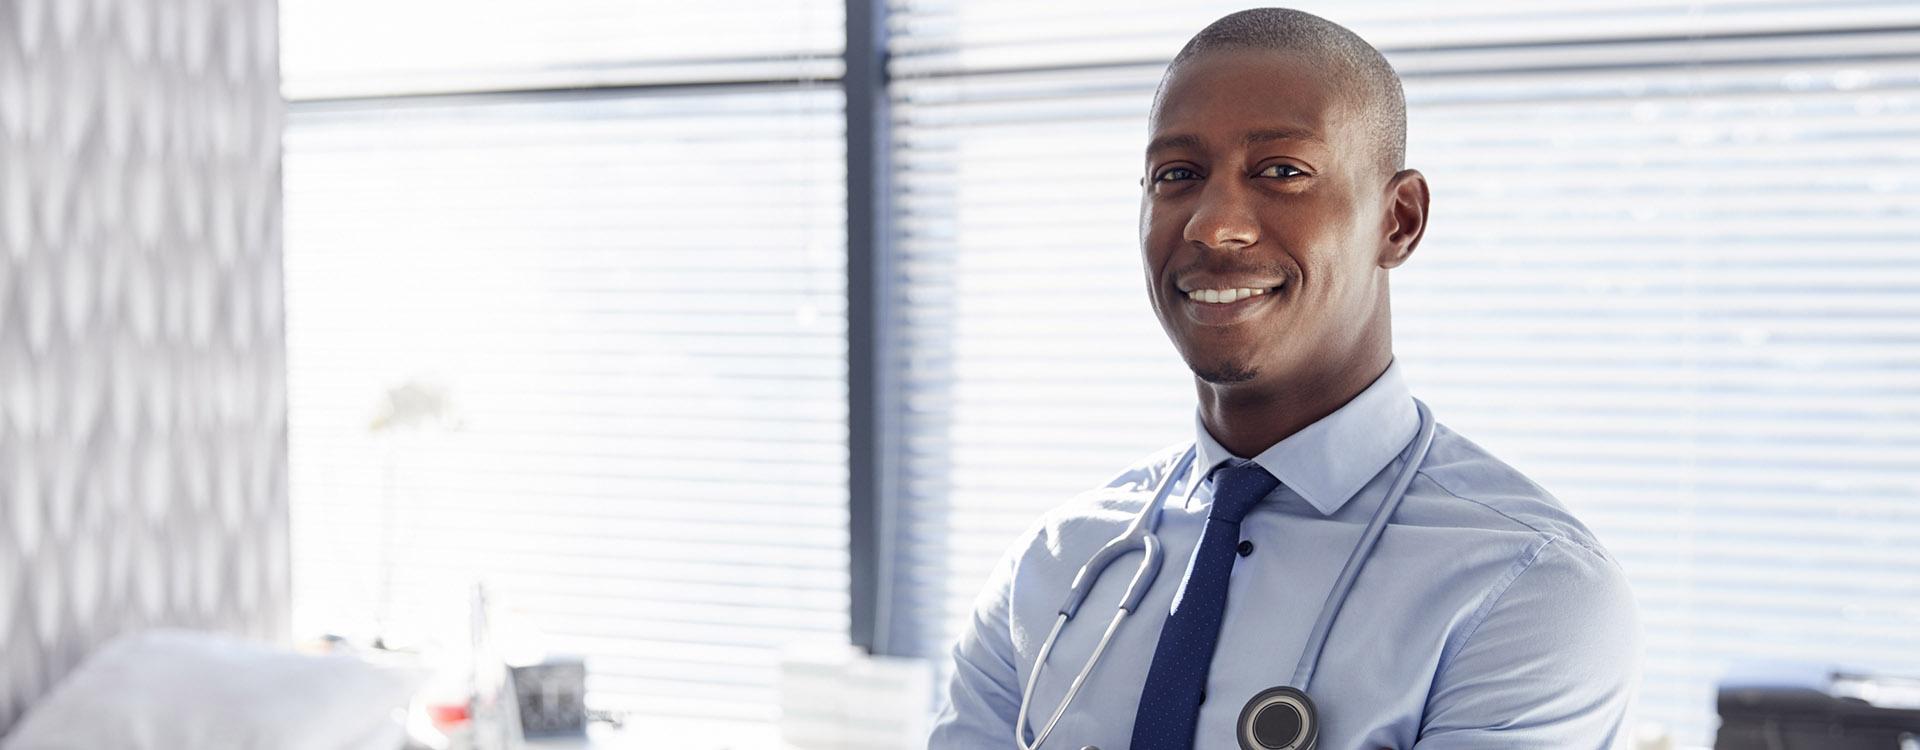 Portrait Of Smiling Male Doctor With Stethoscope Standing By Desk In Office